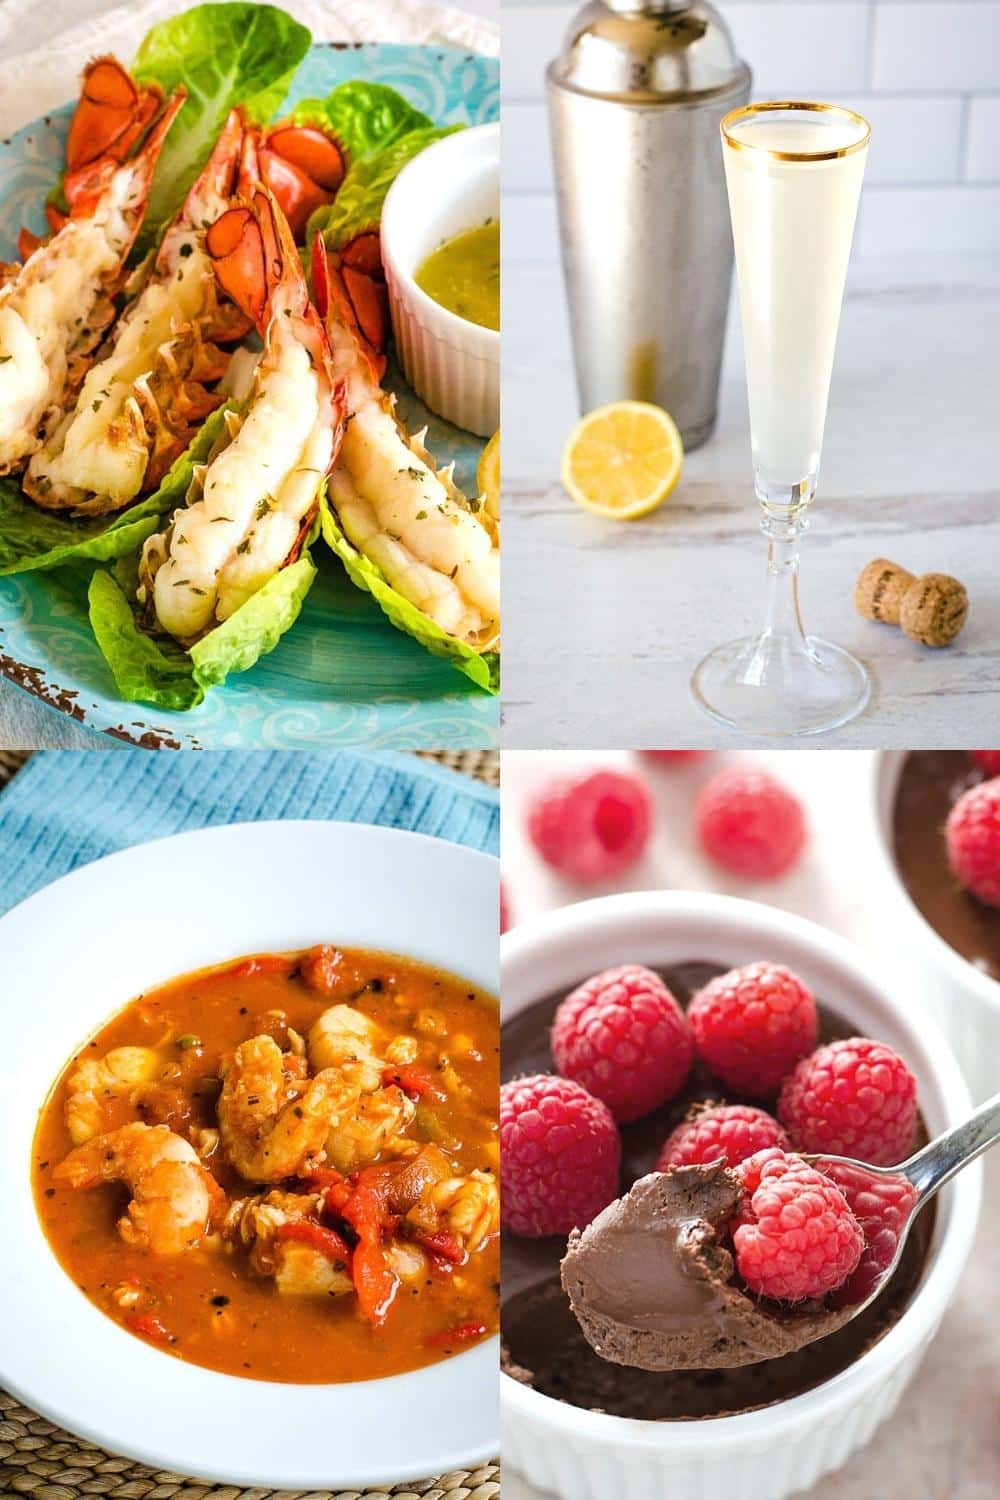 New year's dinner recipes - lobster tails, champagne cocktail, cioppino, chocolate pot de creme with raspberries.